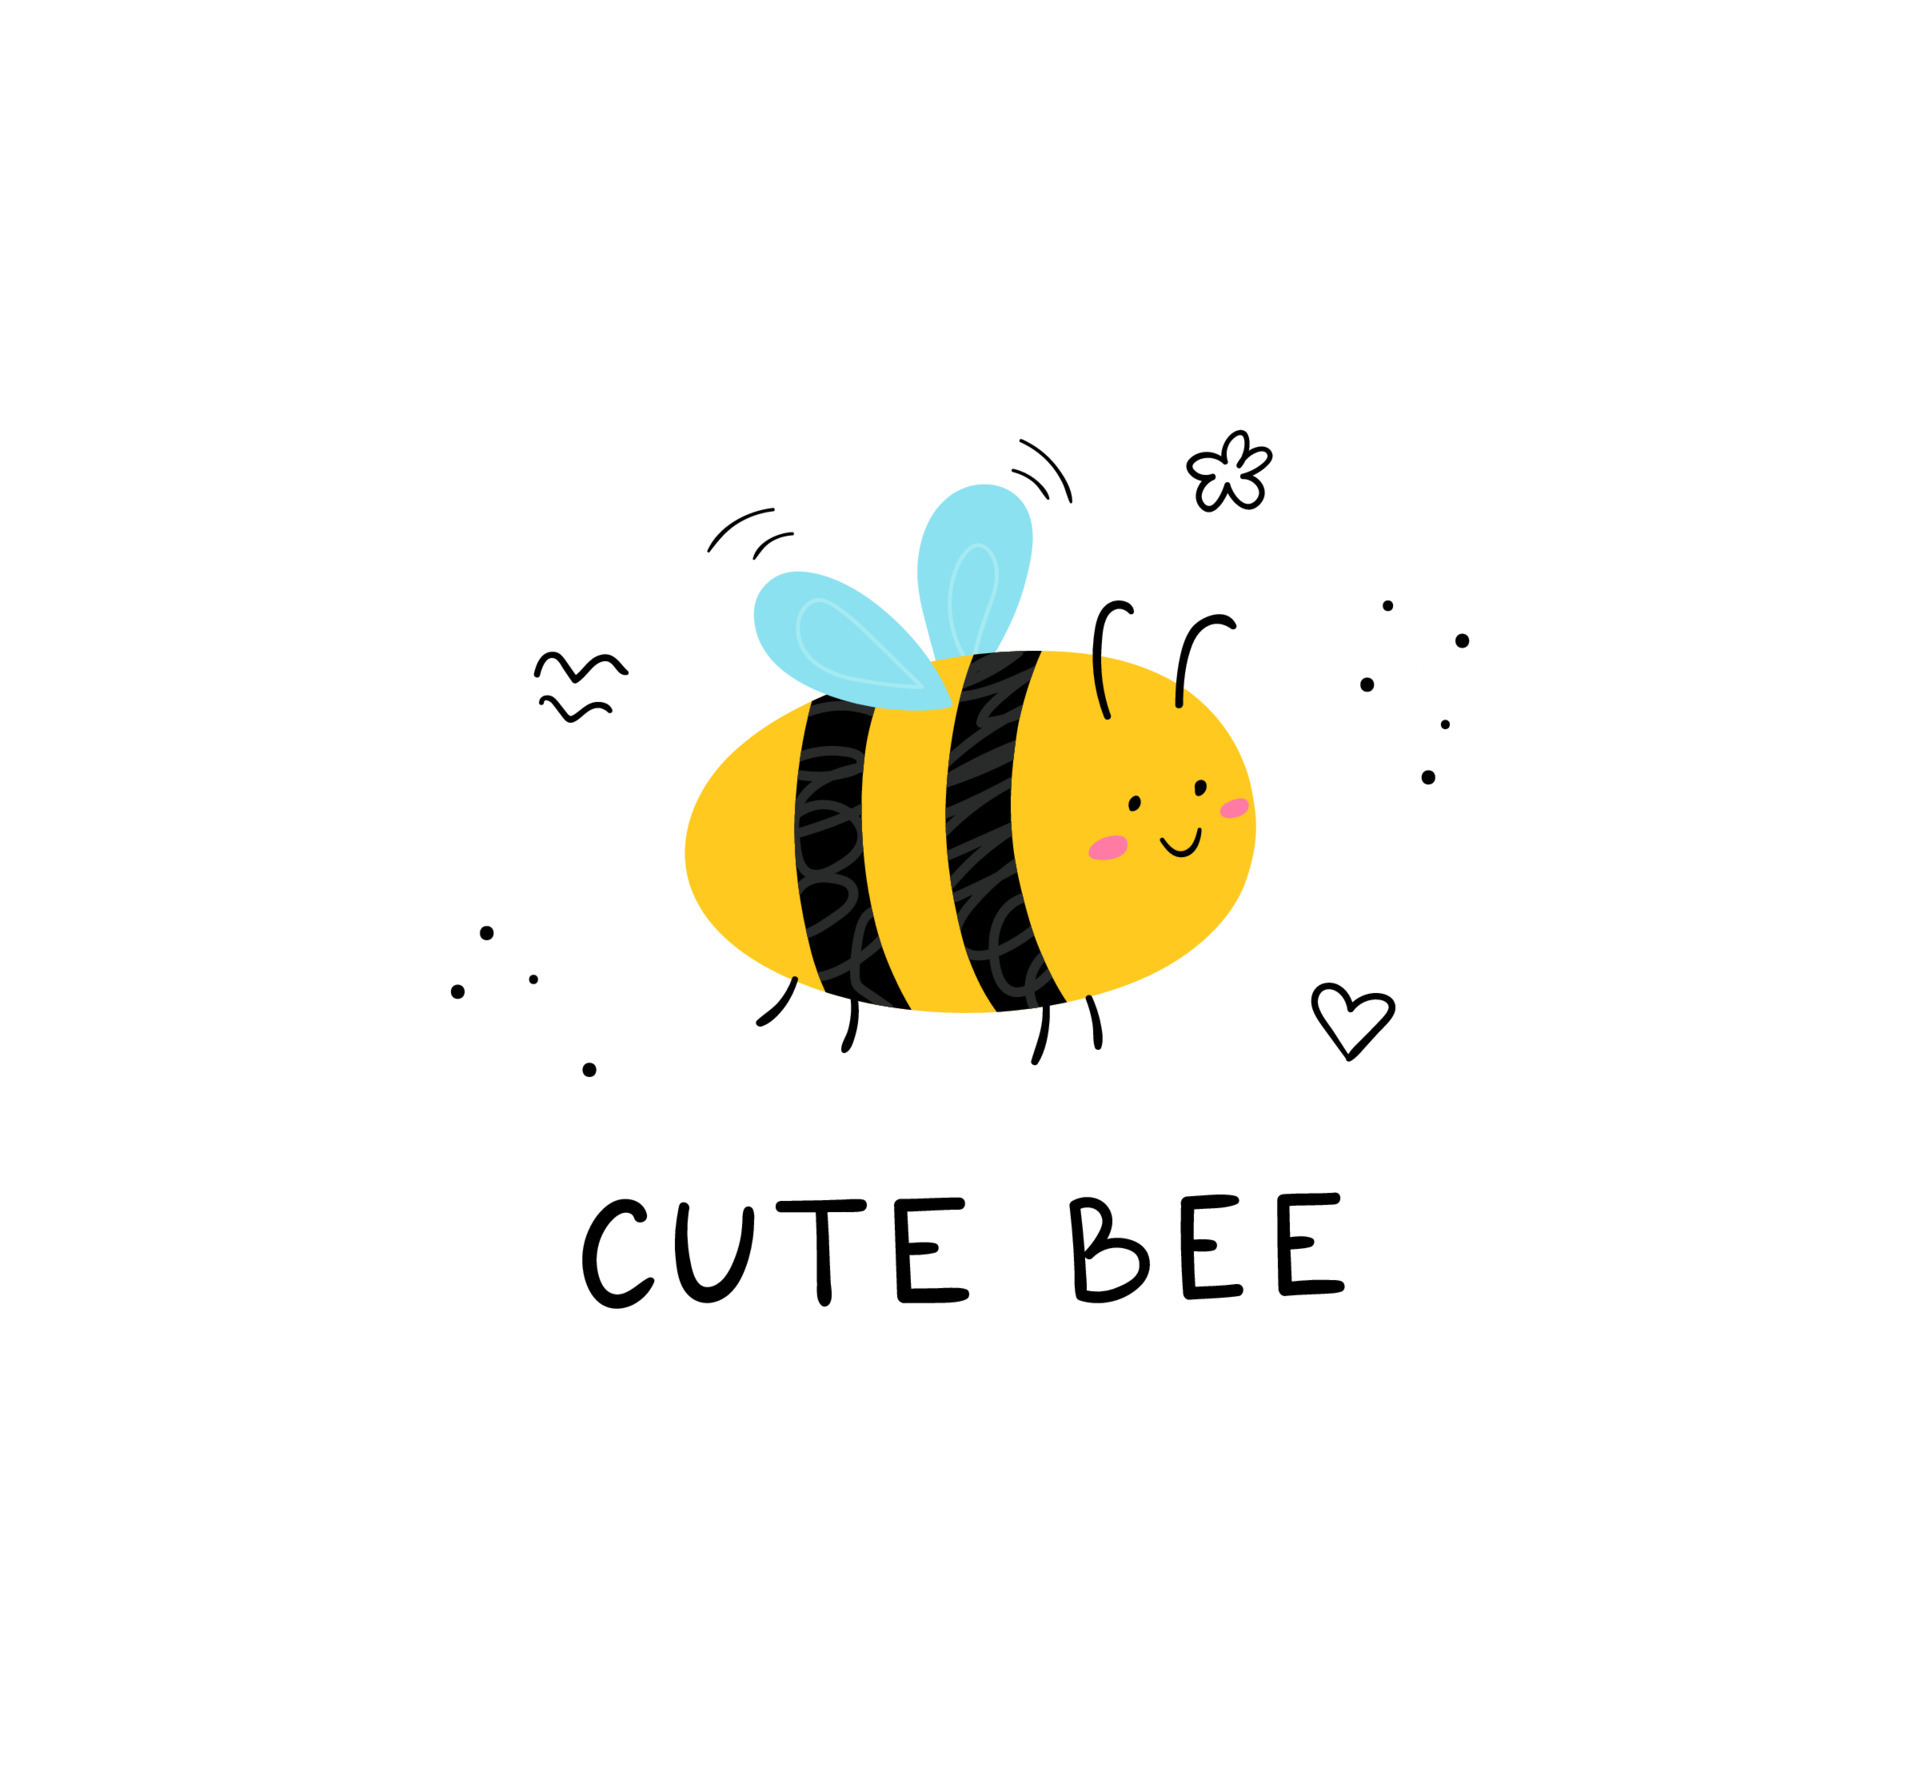 Waggle Dance – The Wheen Bee Foundation